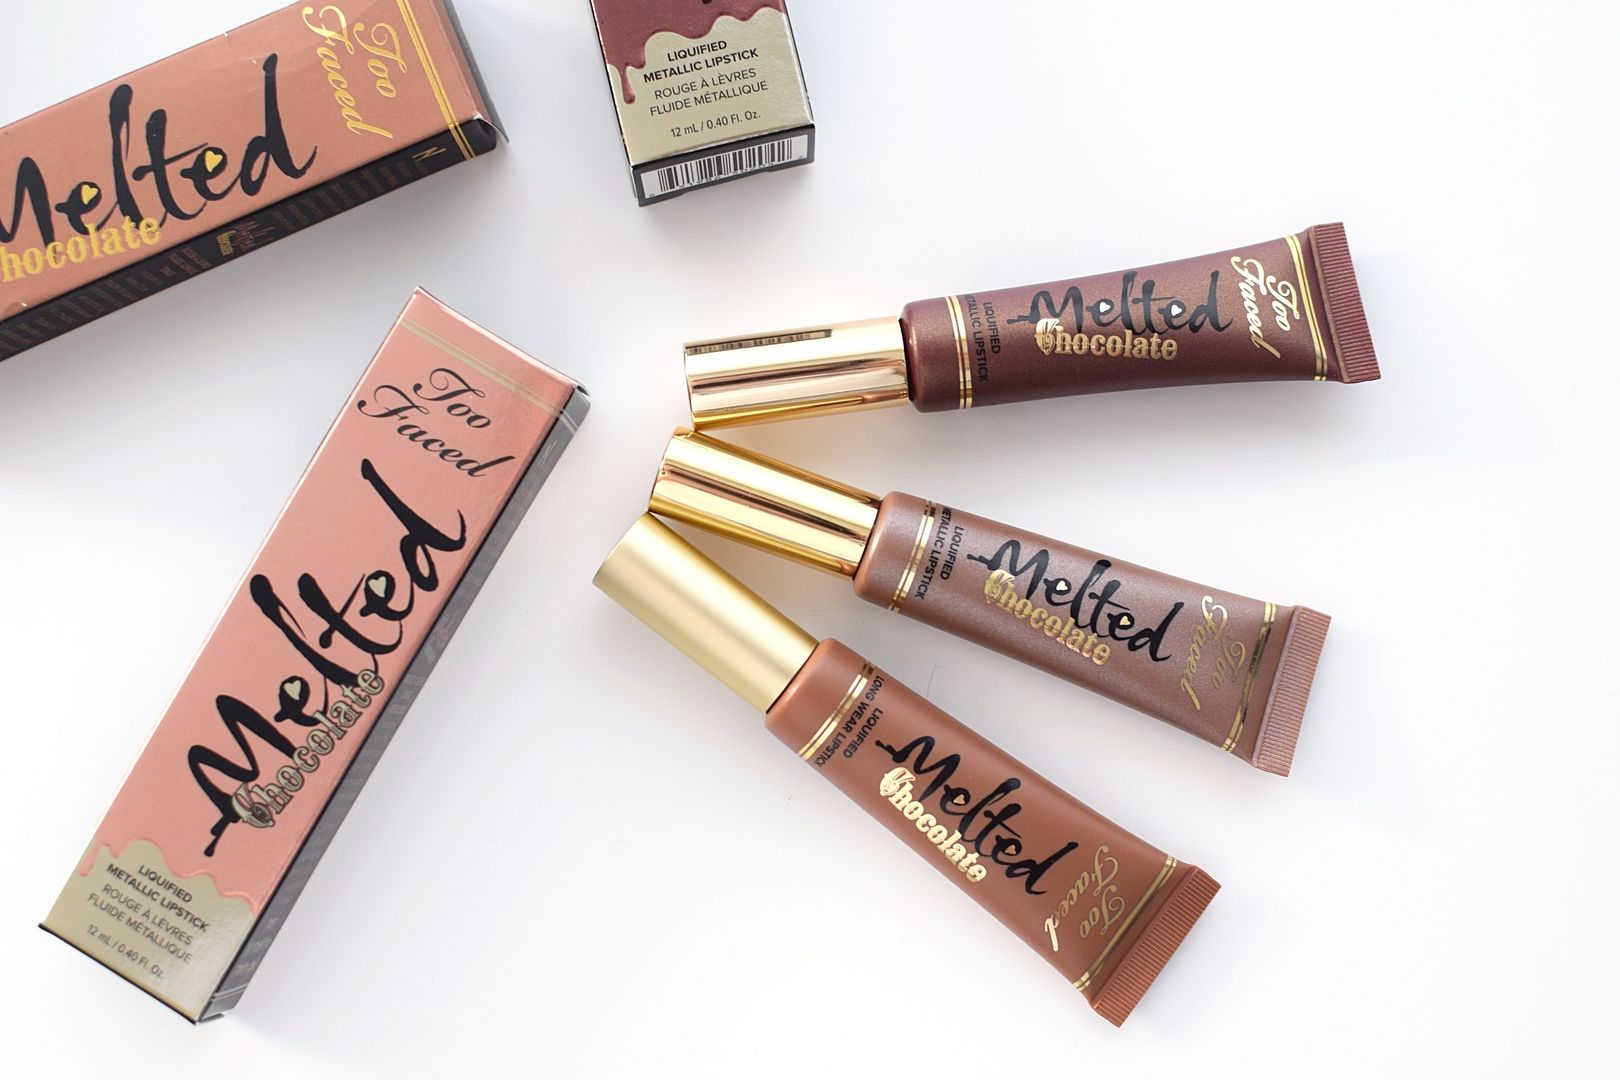 Too Faced Melted Chocolate Liquid Lipsticks Review